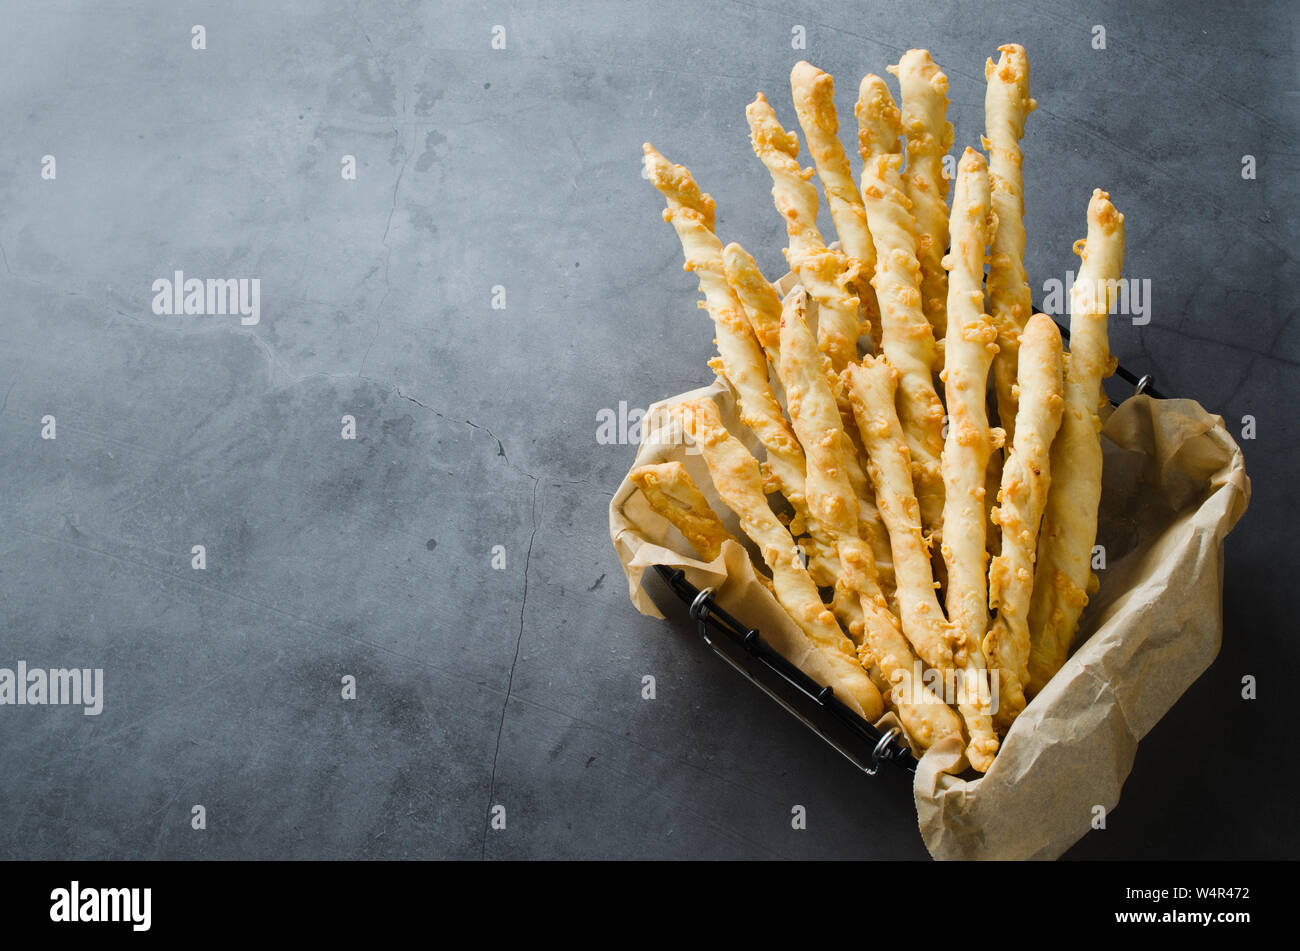 Cheese Stick Breadsticks With Cheese On Dark Background Concept For Snack Or Party Time Stock Photo Alamy